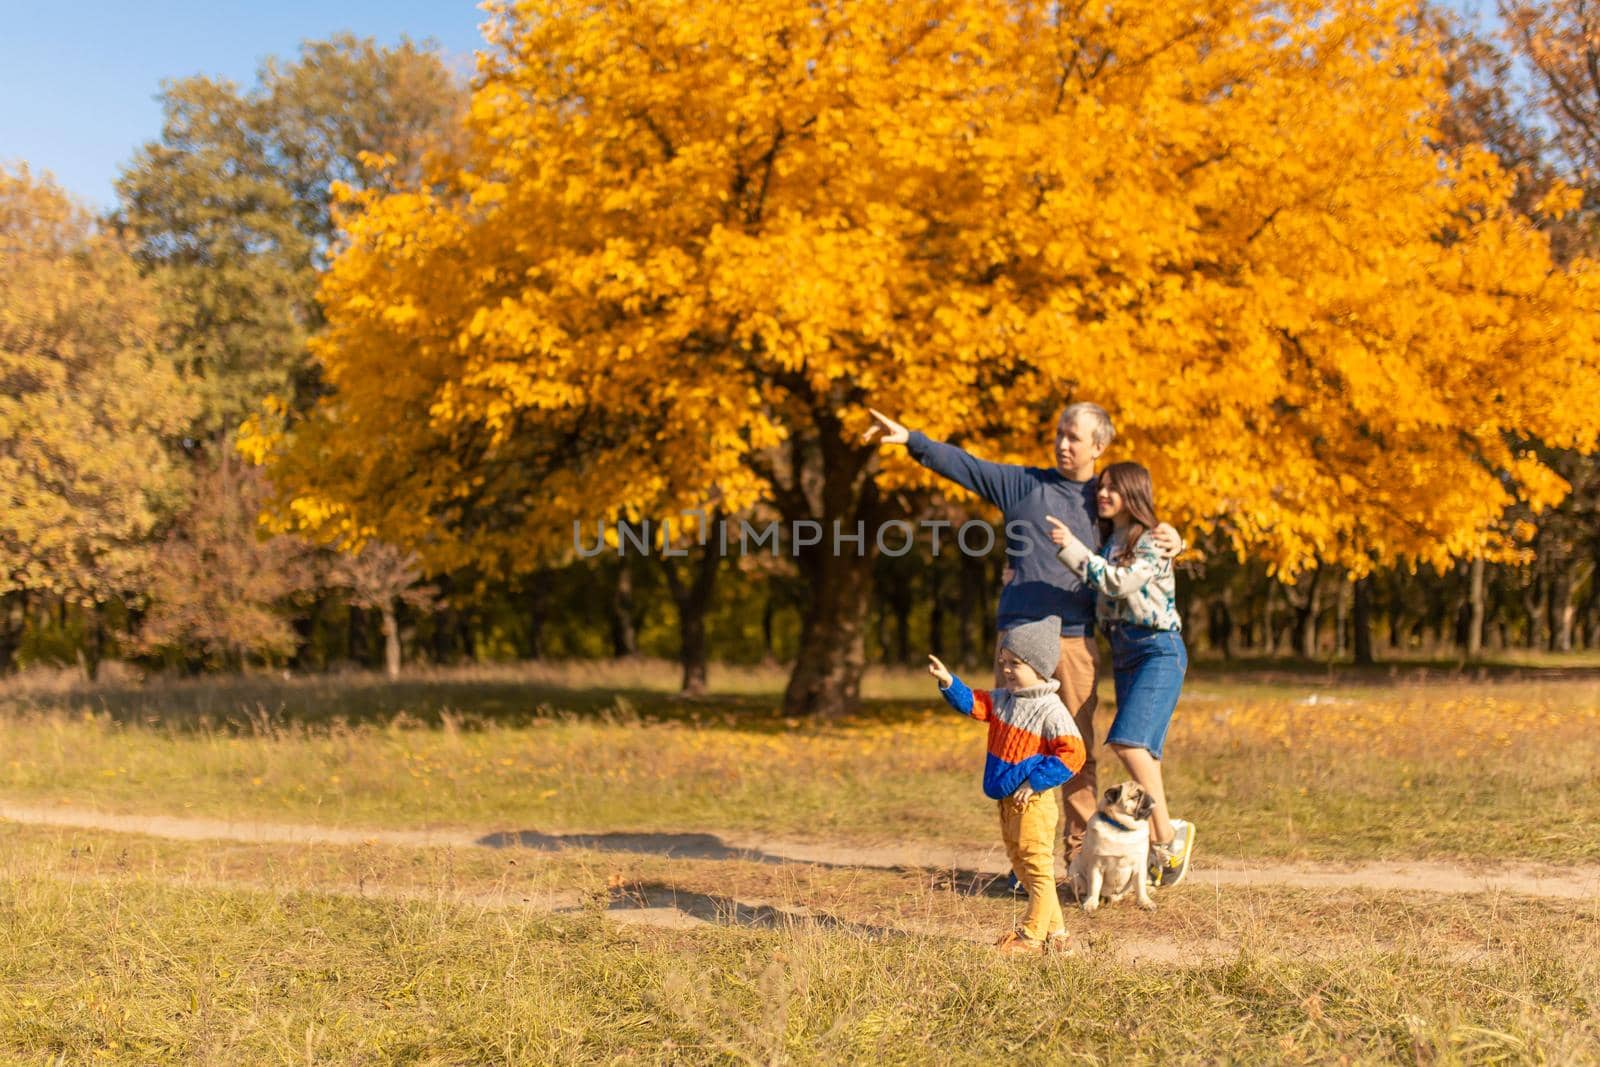 A young family with a small child and a dog spend time together for a walk in the autumn park by Try_my_best